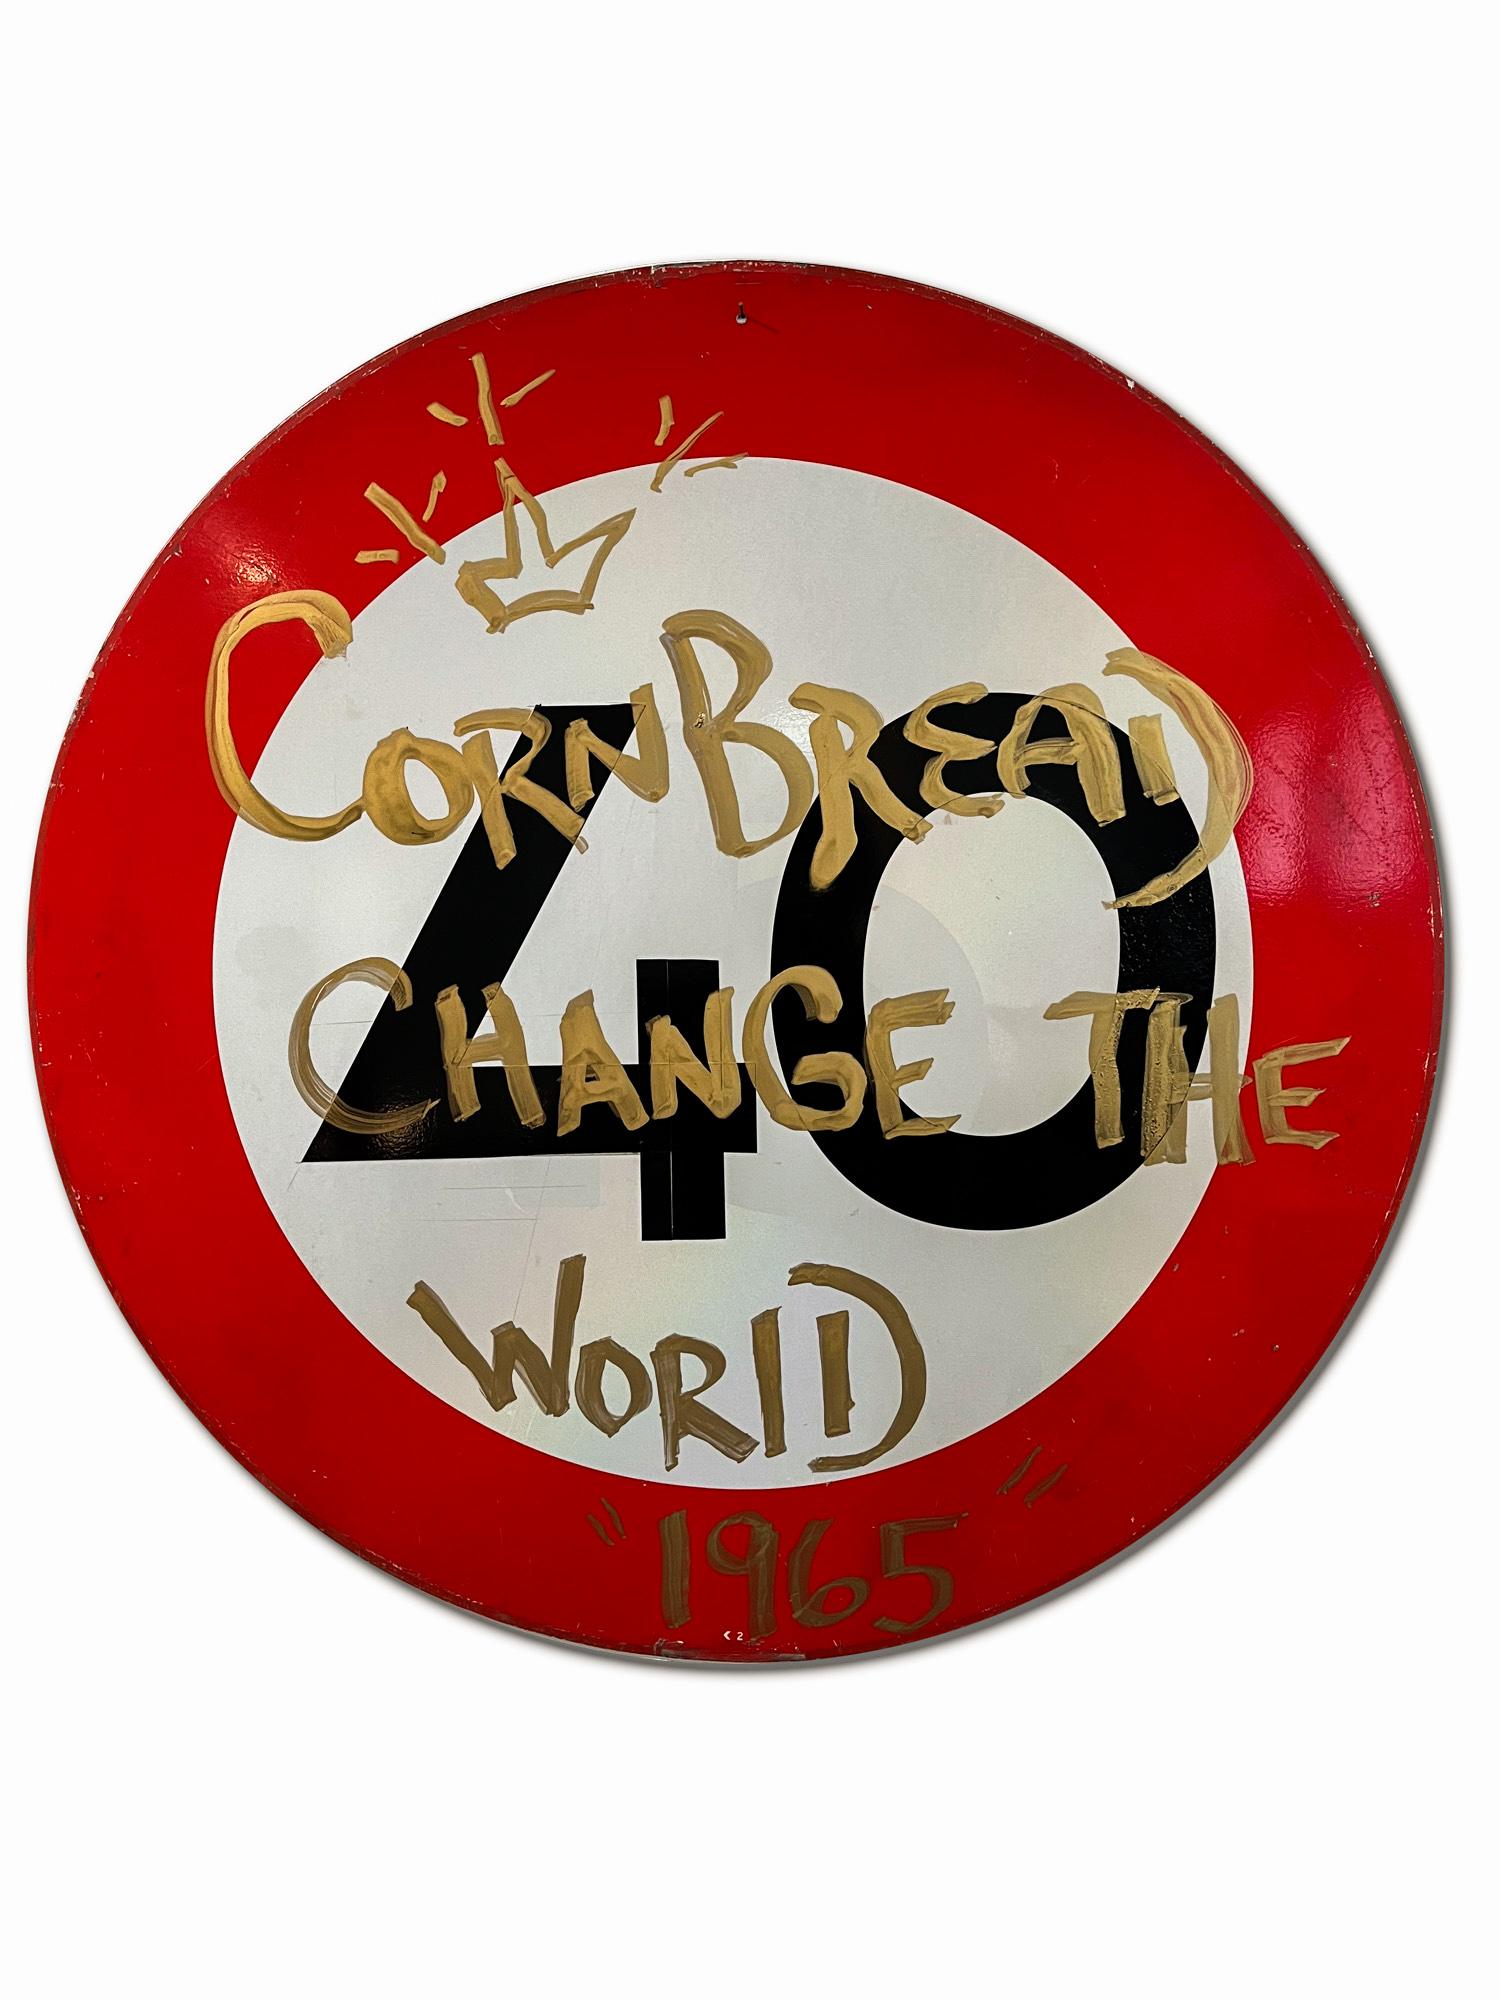 This artwork titled "Cornbread Change The World 1965 Shield" is an original artwork by Cornbread made of acrylic paint on a retired Amsterdam street sign. The piece measures 80cm / 31.5in diameter.

Darryl McCray, known by his tagging name,